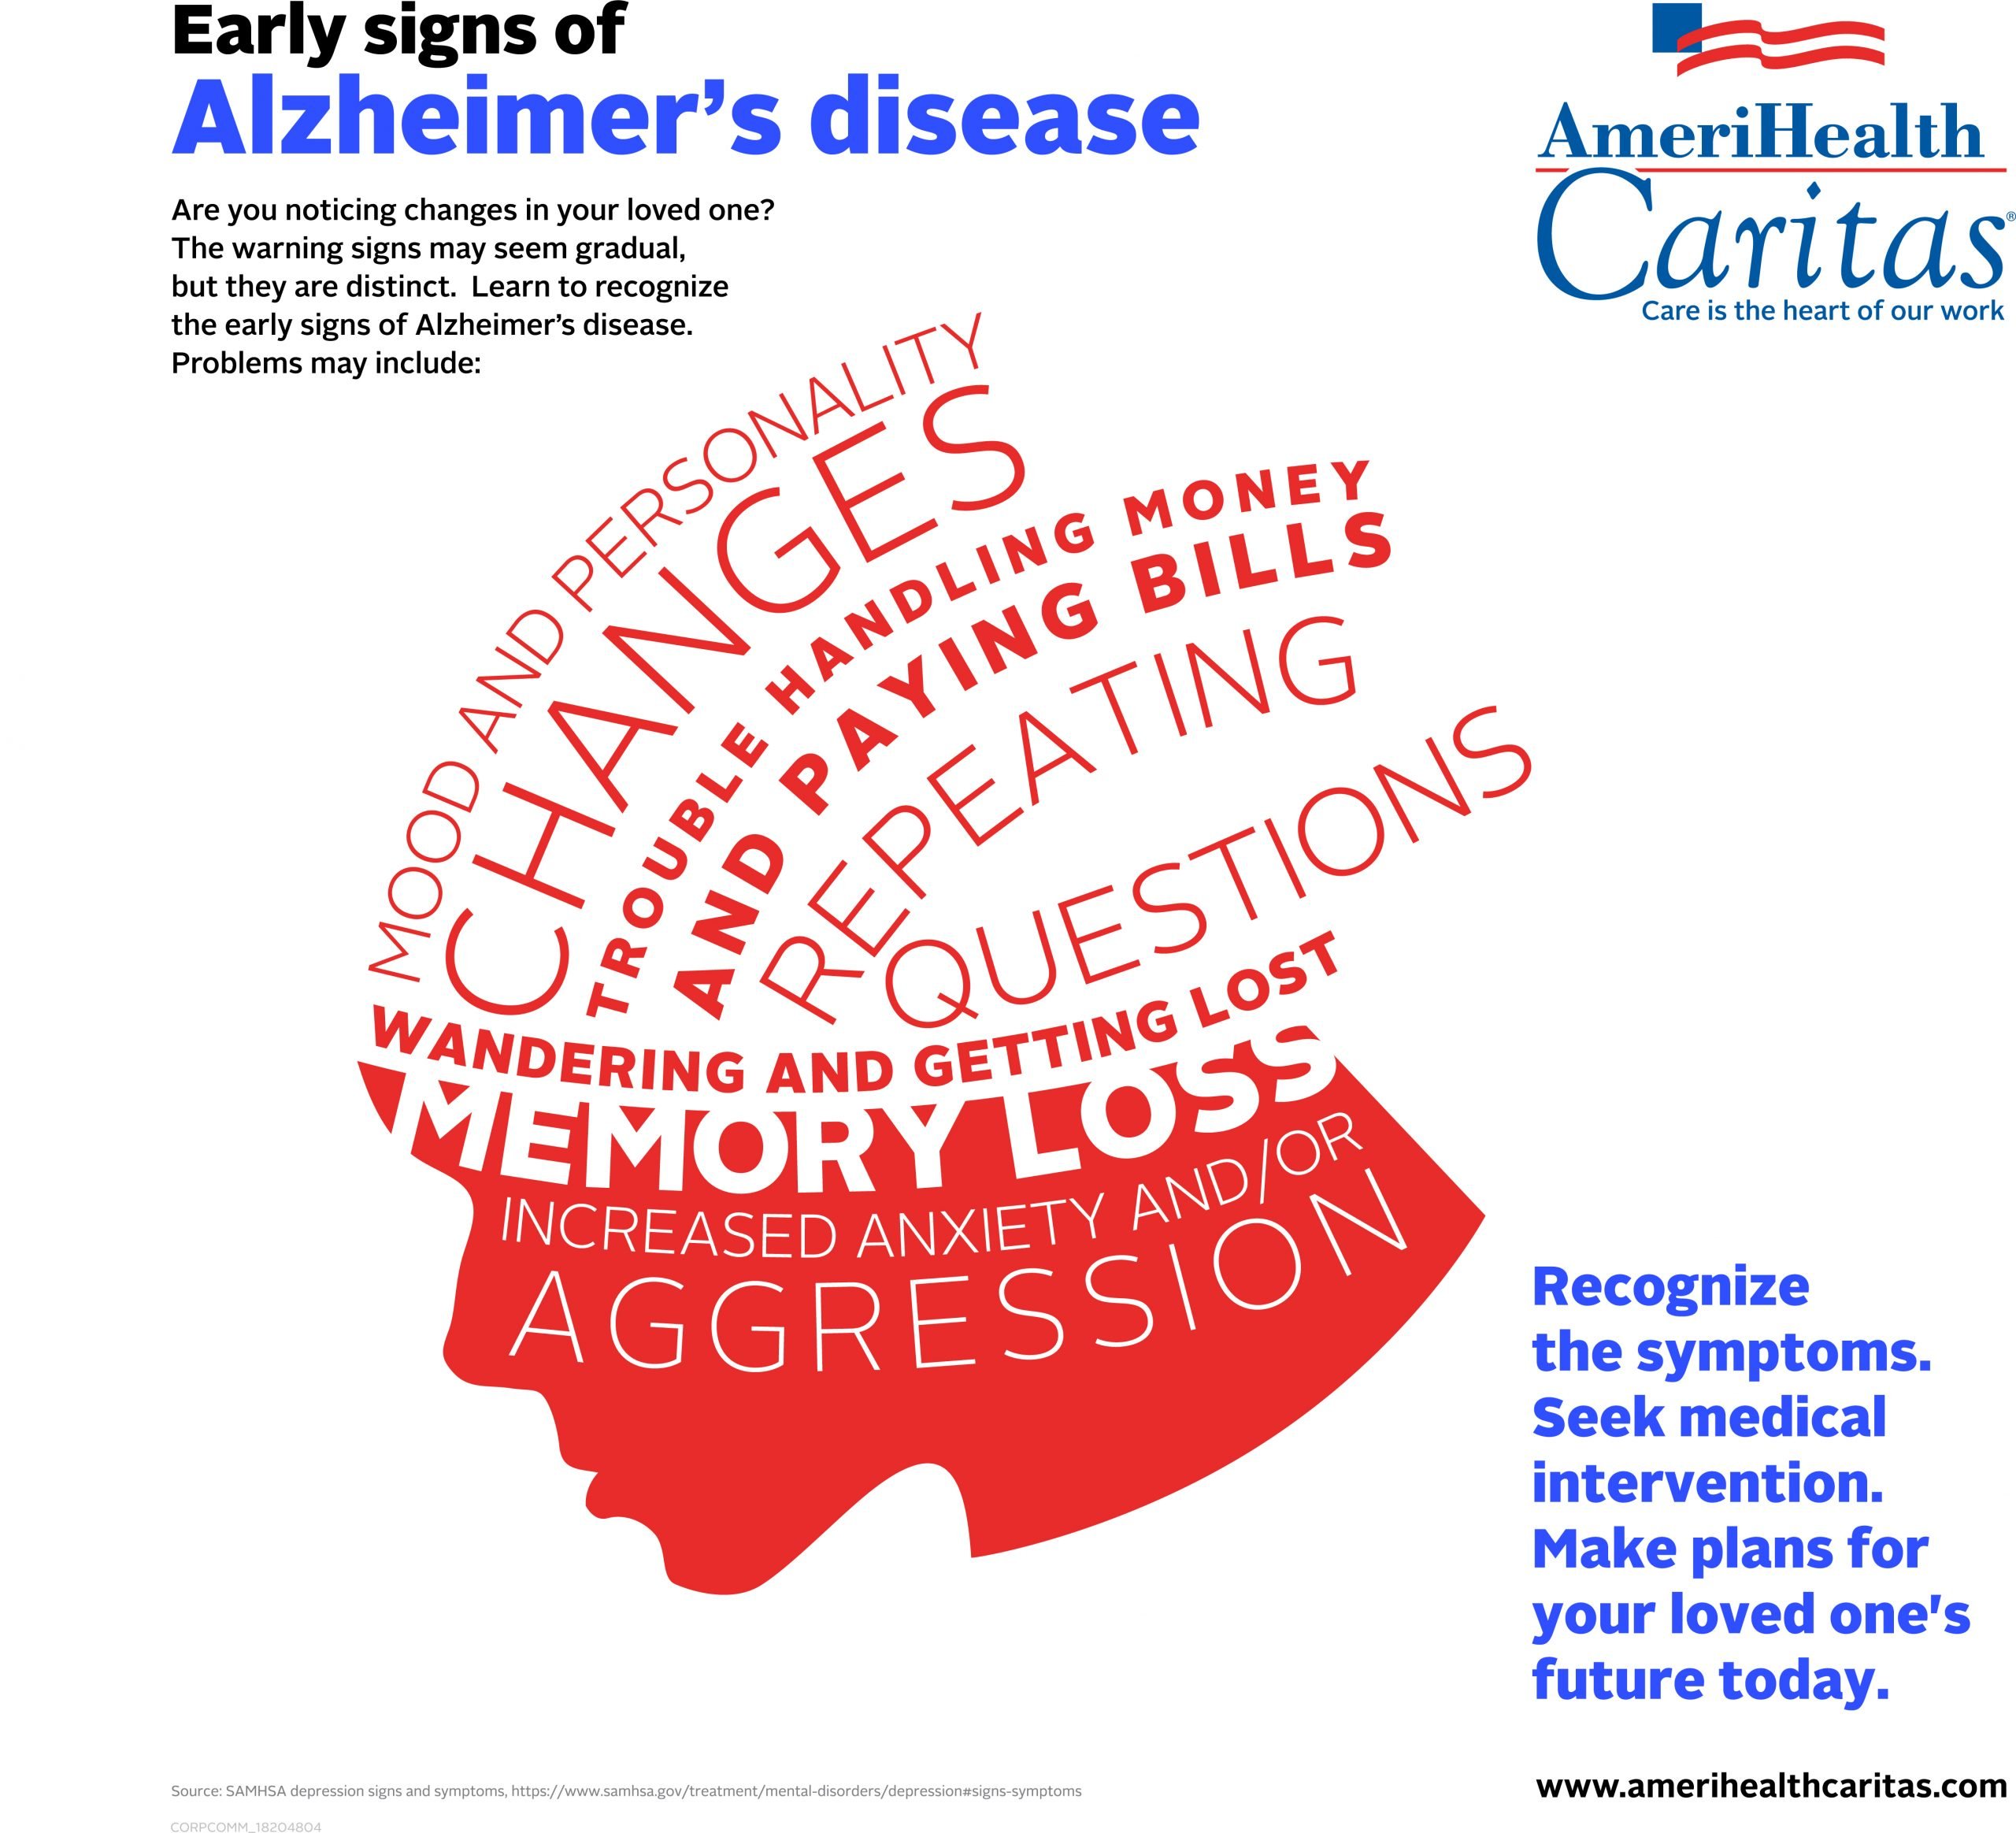 Donât Miss the Early Warning Signs of Alzheimerâs Disease ...